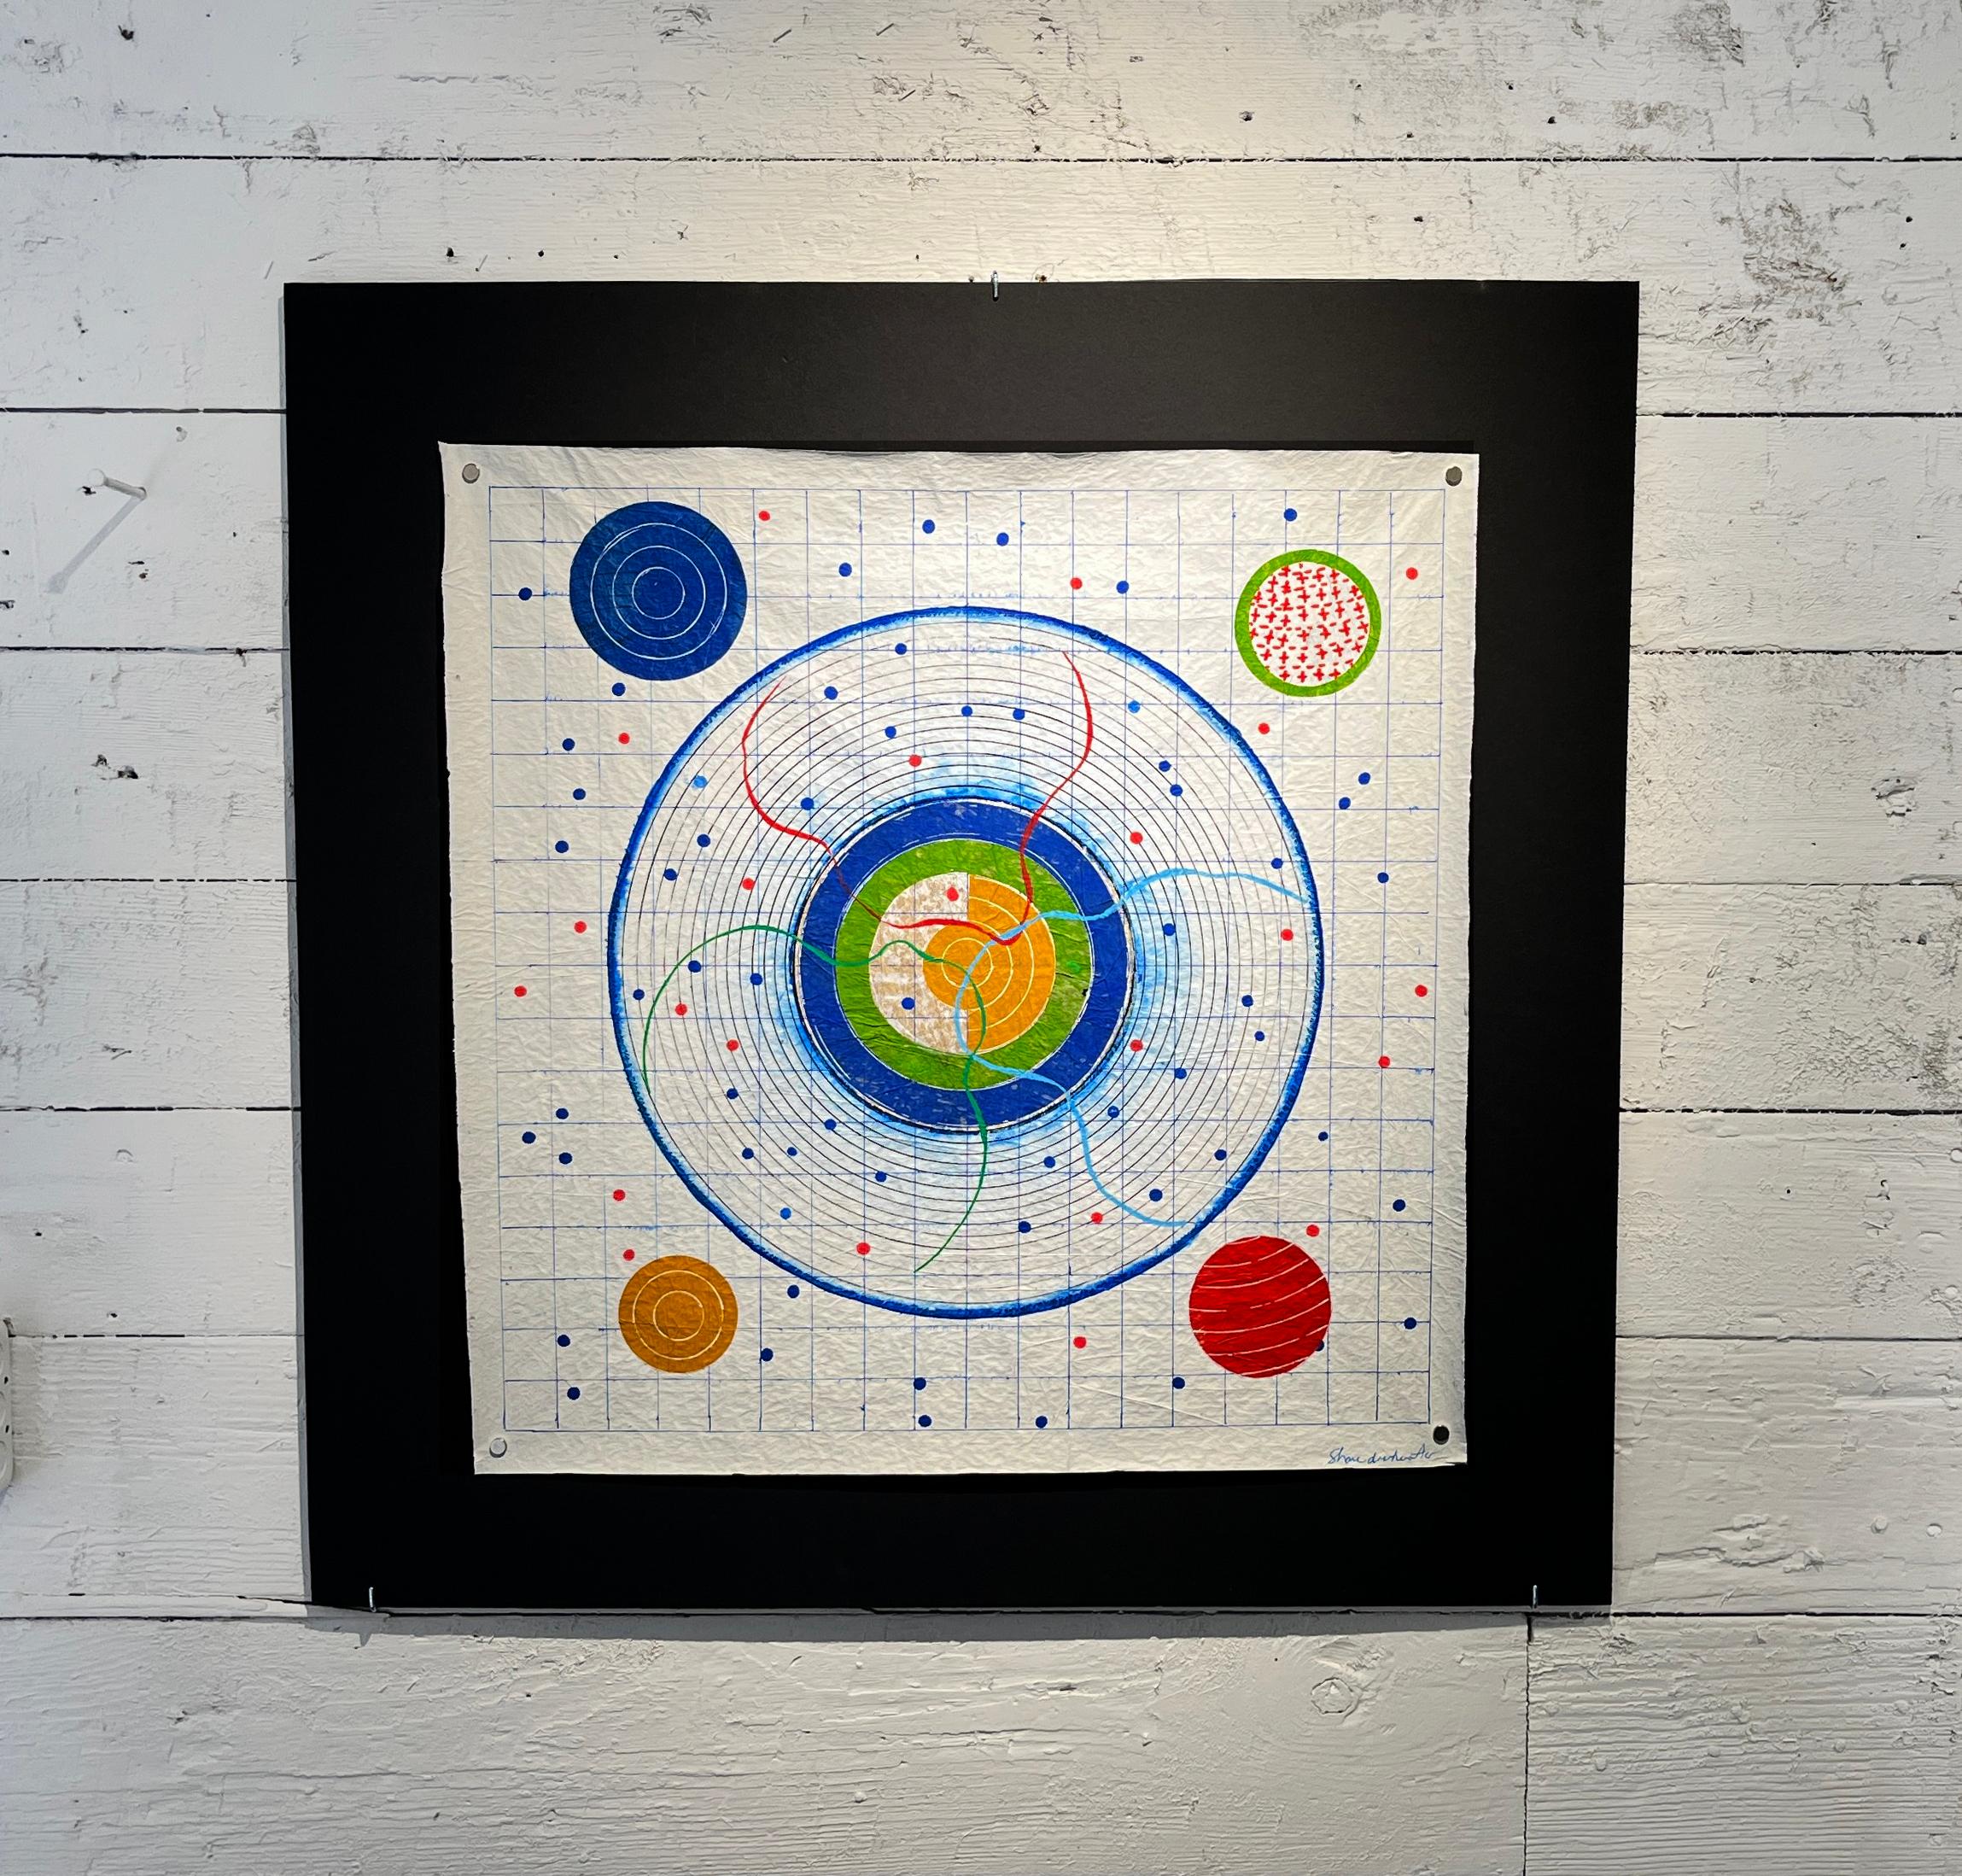 Tasmanian-born artist Shane Drinkwater harnesses his interest in ancient manuscripts, cartography and astronomy to produce abstract artworks of mystery and beauty. All of his artworks are Untitled and measure approximately 20x20